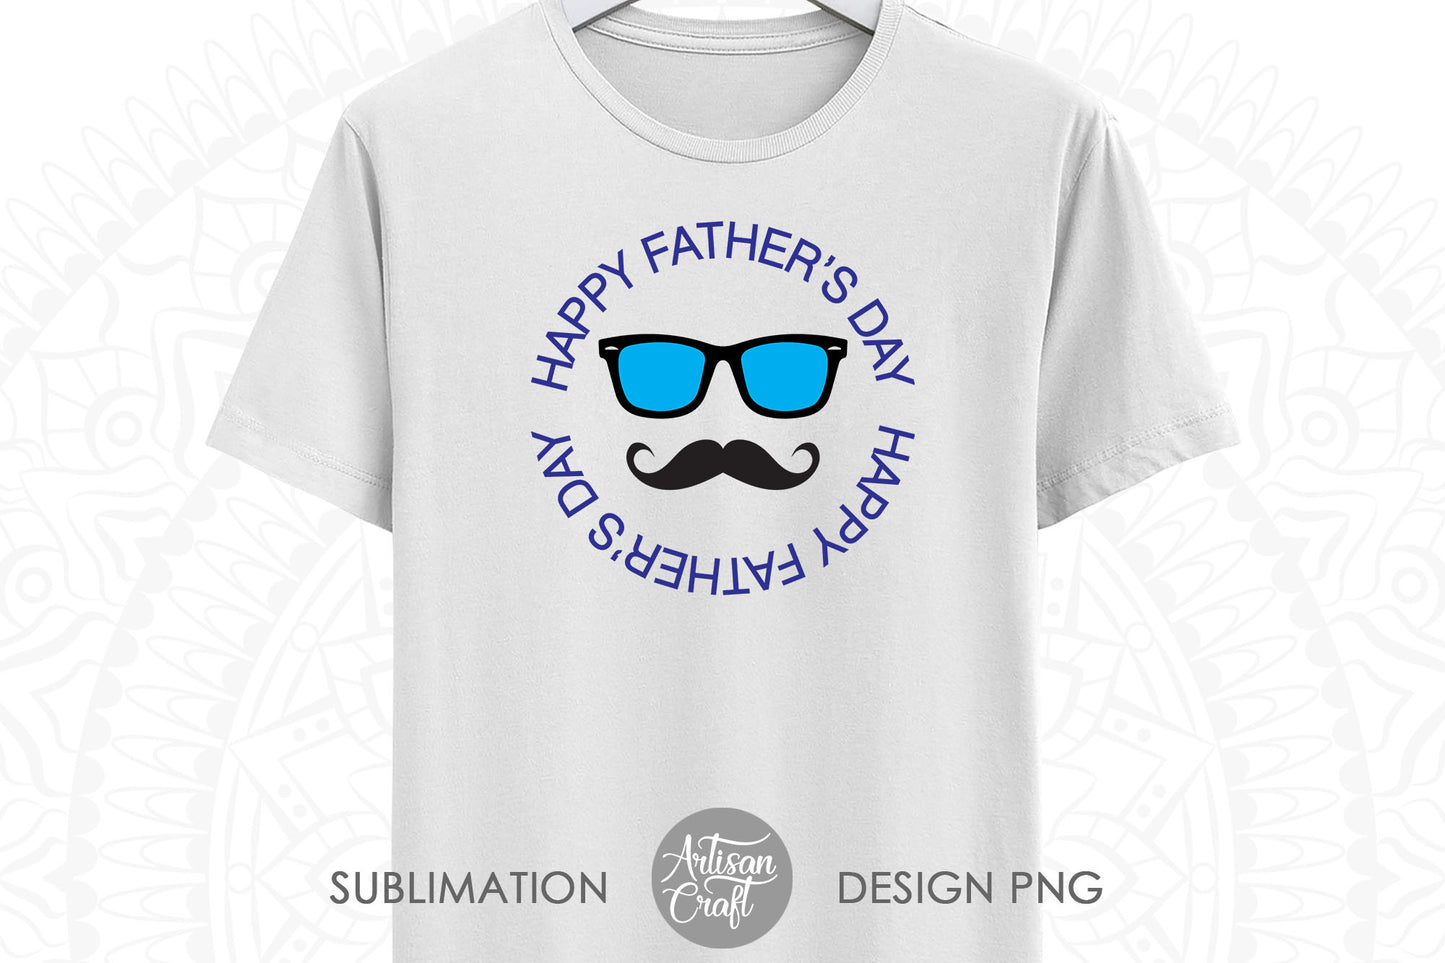 Happy Fathers day SVG with sunglasses & moustache